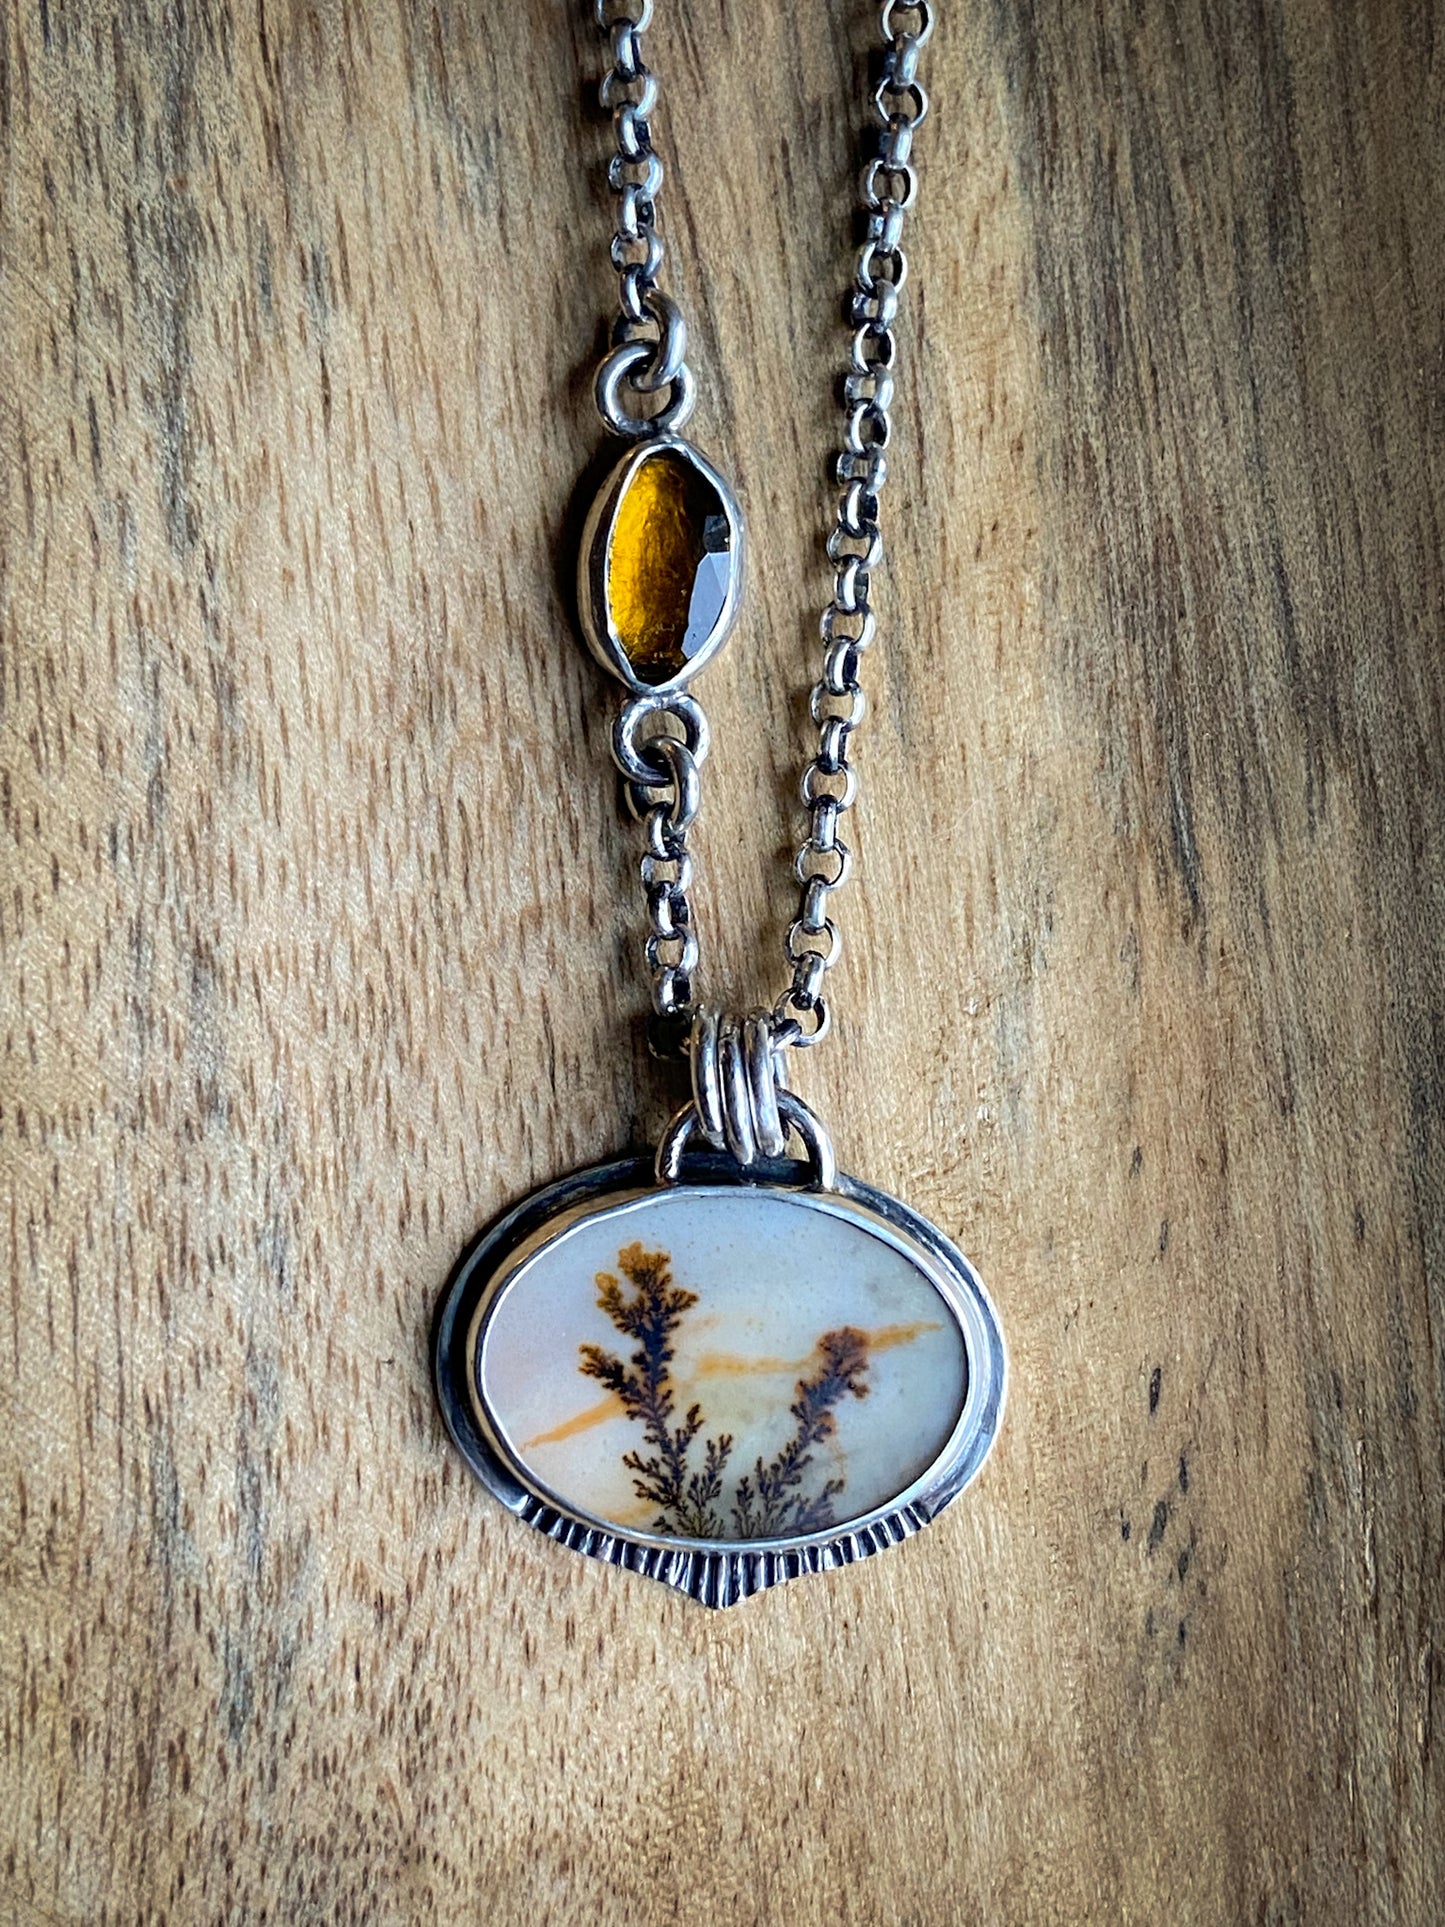 Autumn Landscape Dendritic Agate and Whisky Tourmaline Necklace